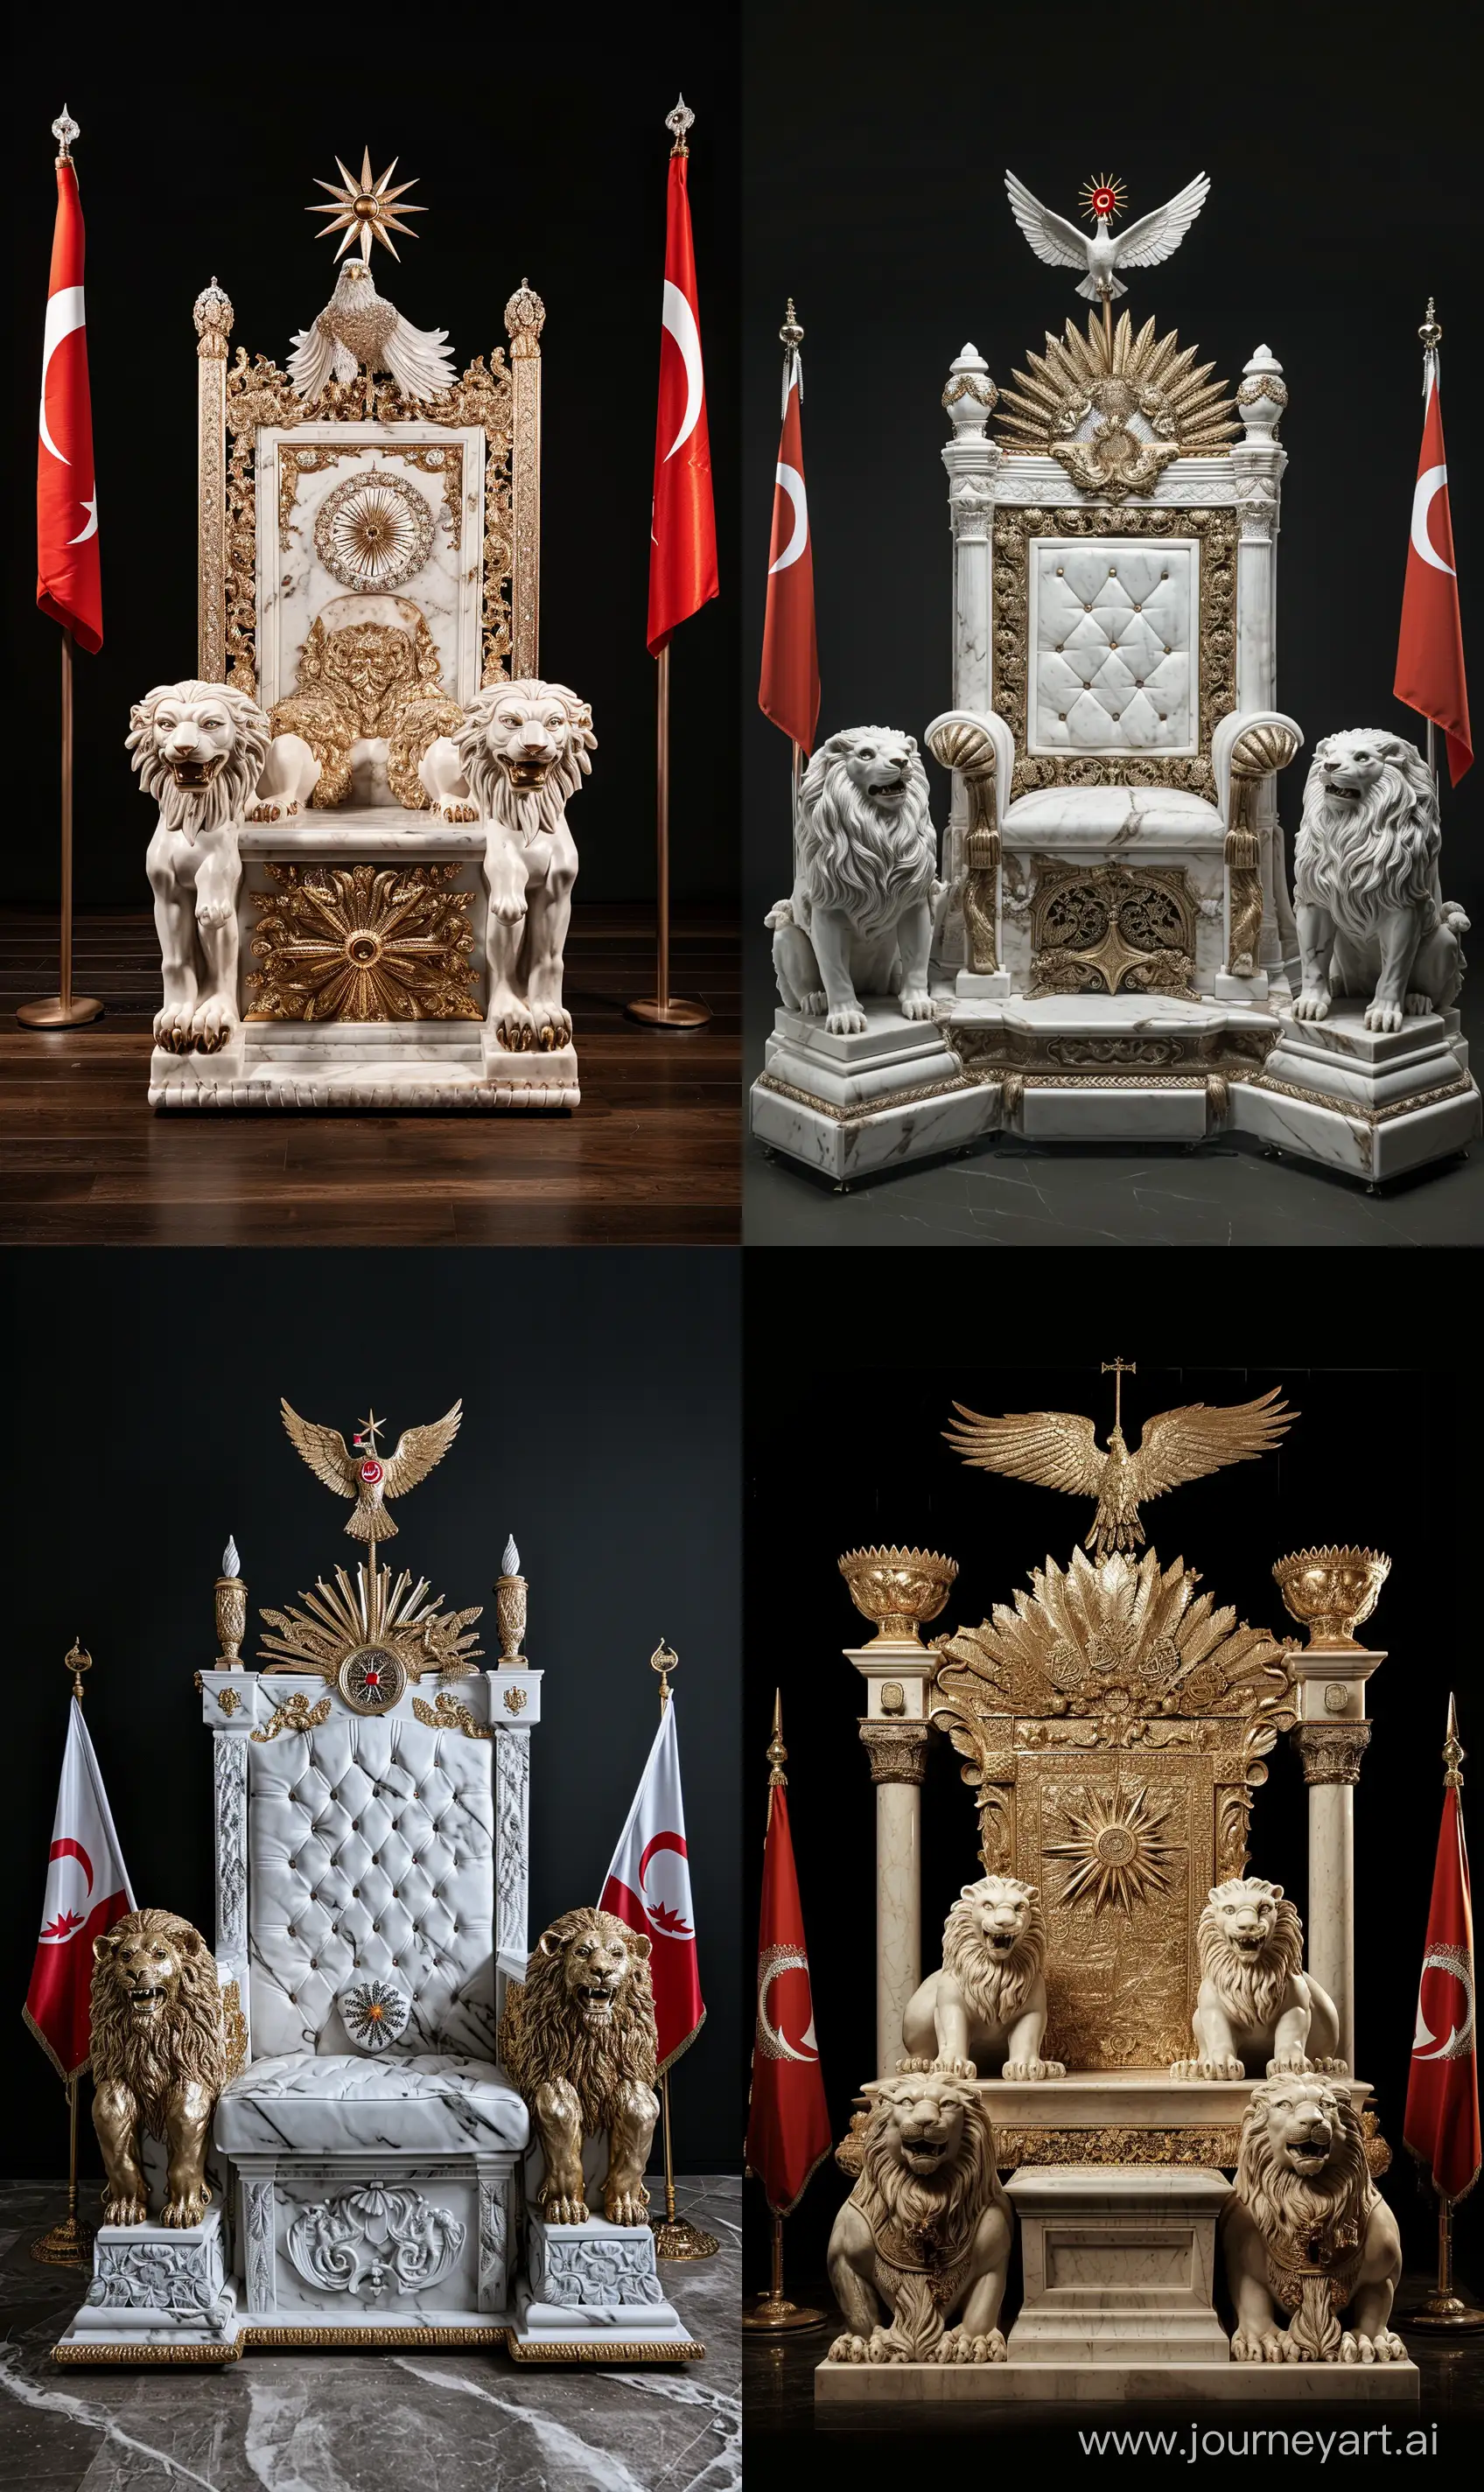 A white golden marbled Islamic throne, sculpture of two roaring lions on arms of the throne, statue of an eagle holding islamic radiating star on top of the throne, two ottoman flags placed on sides --ar 3:5 --v 6